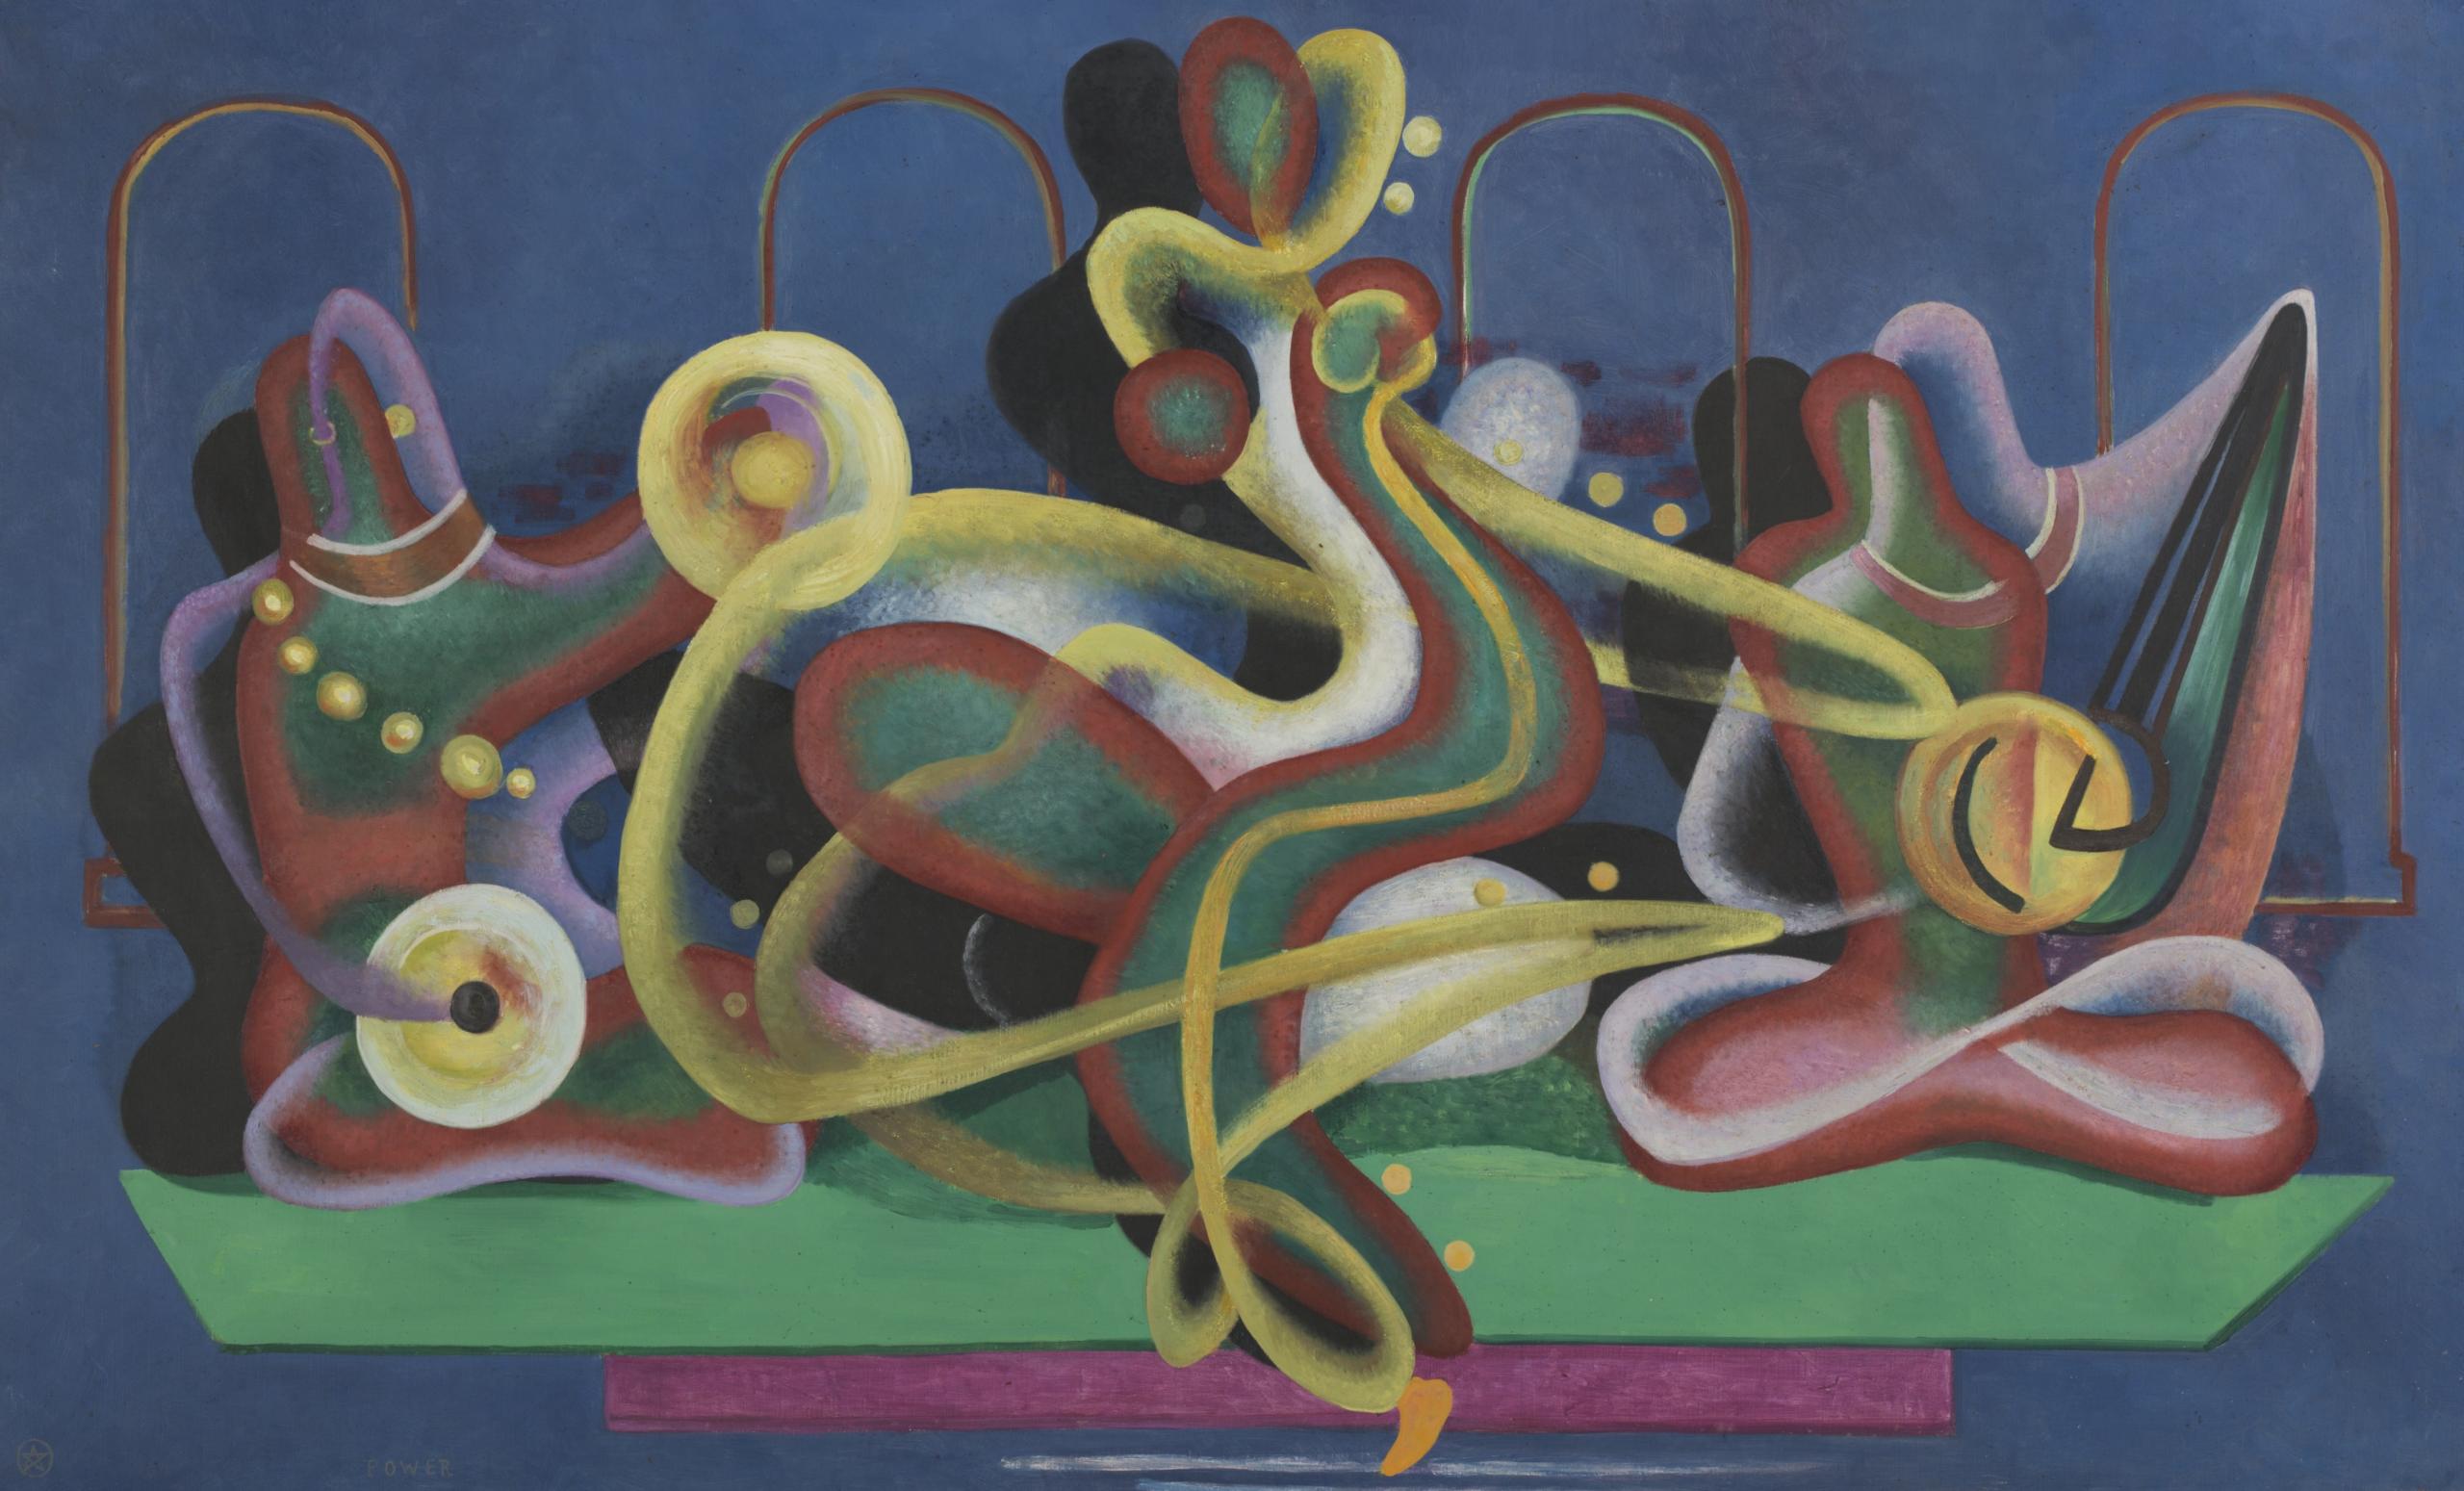 A painting by JW Power which shows a series of abstract shapes